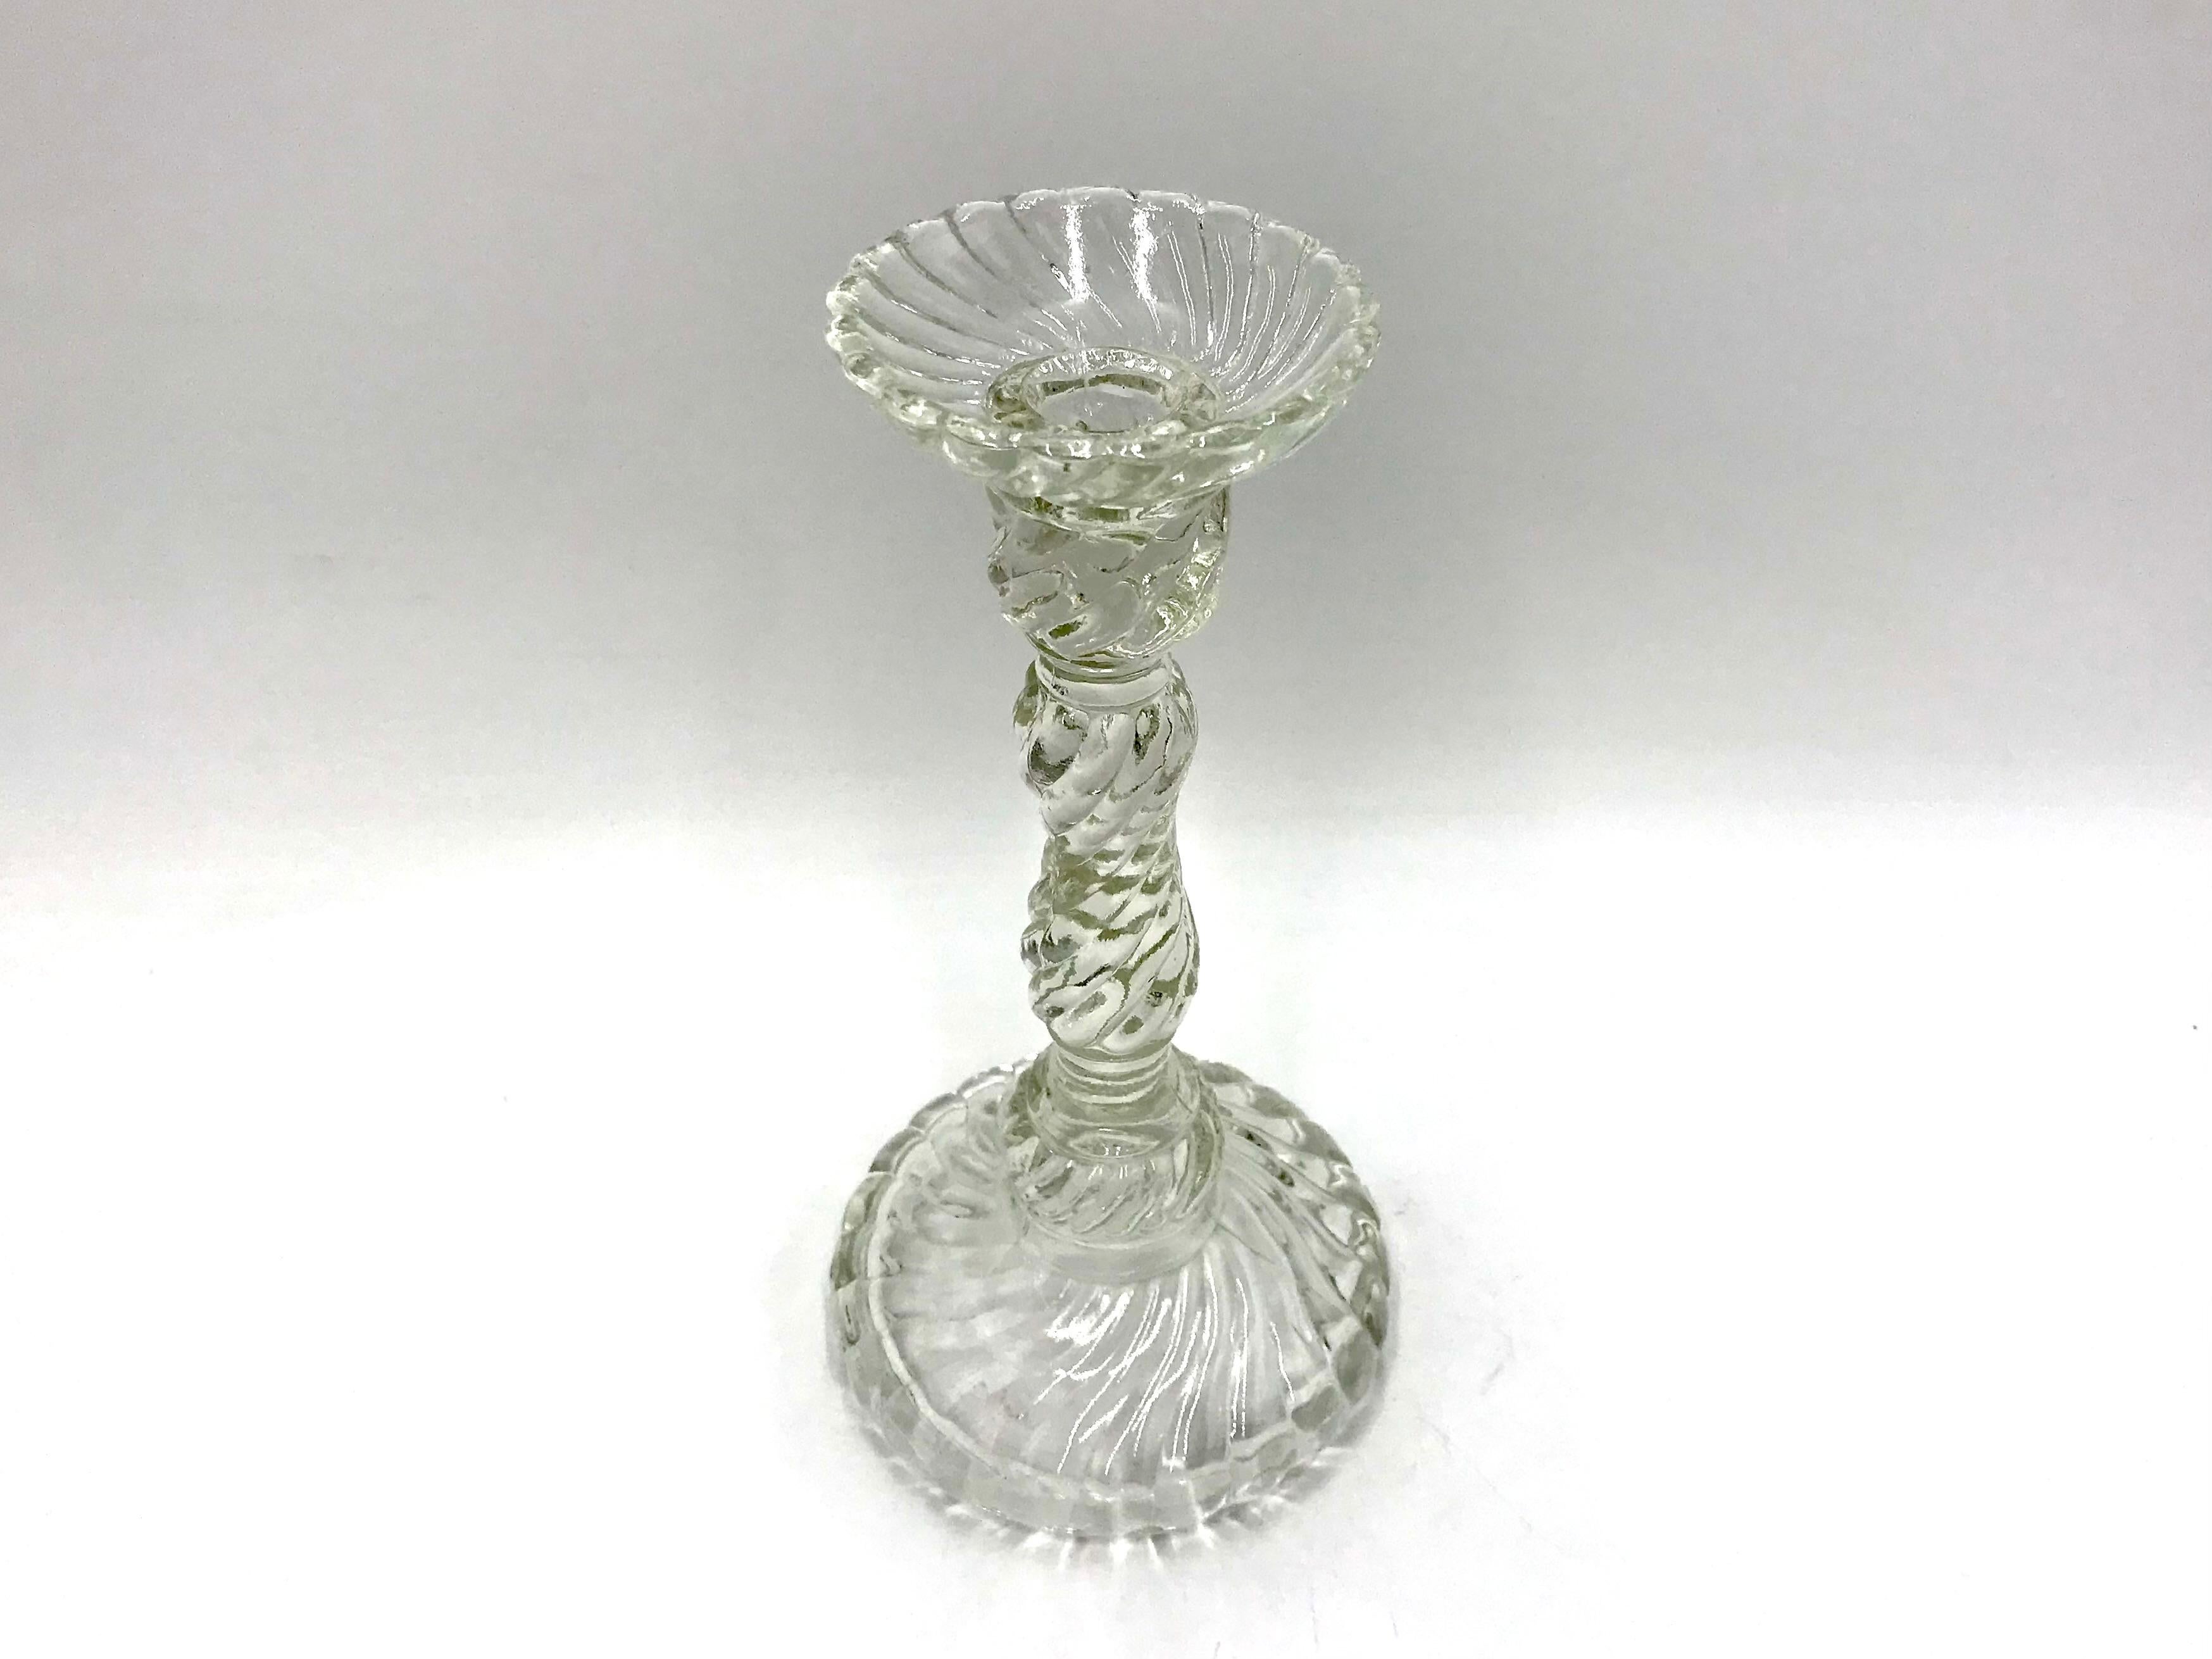 Clear candlestick, Poland
Produced in 1970-1980s. 
Measures: height 22cm diameter 7,5cm.